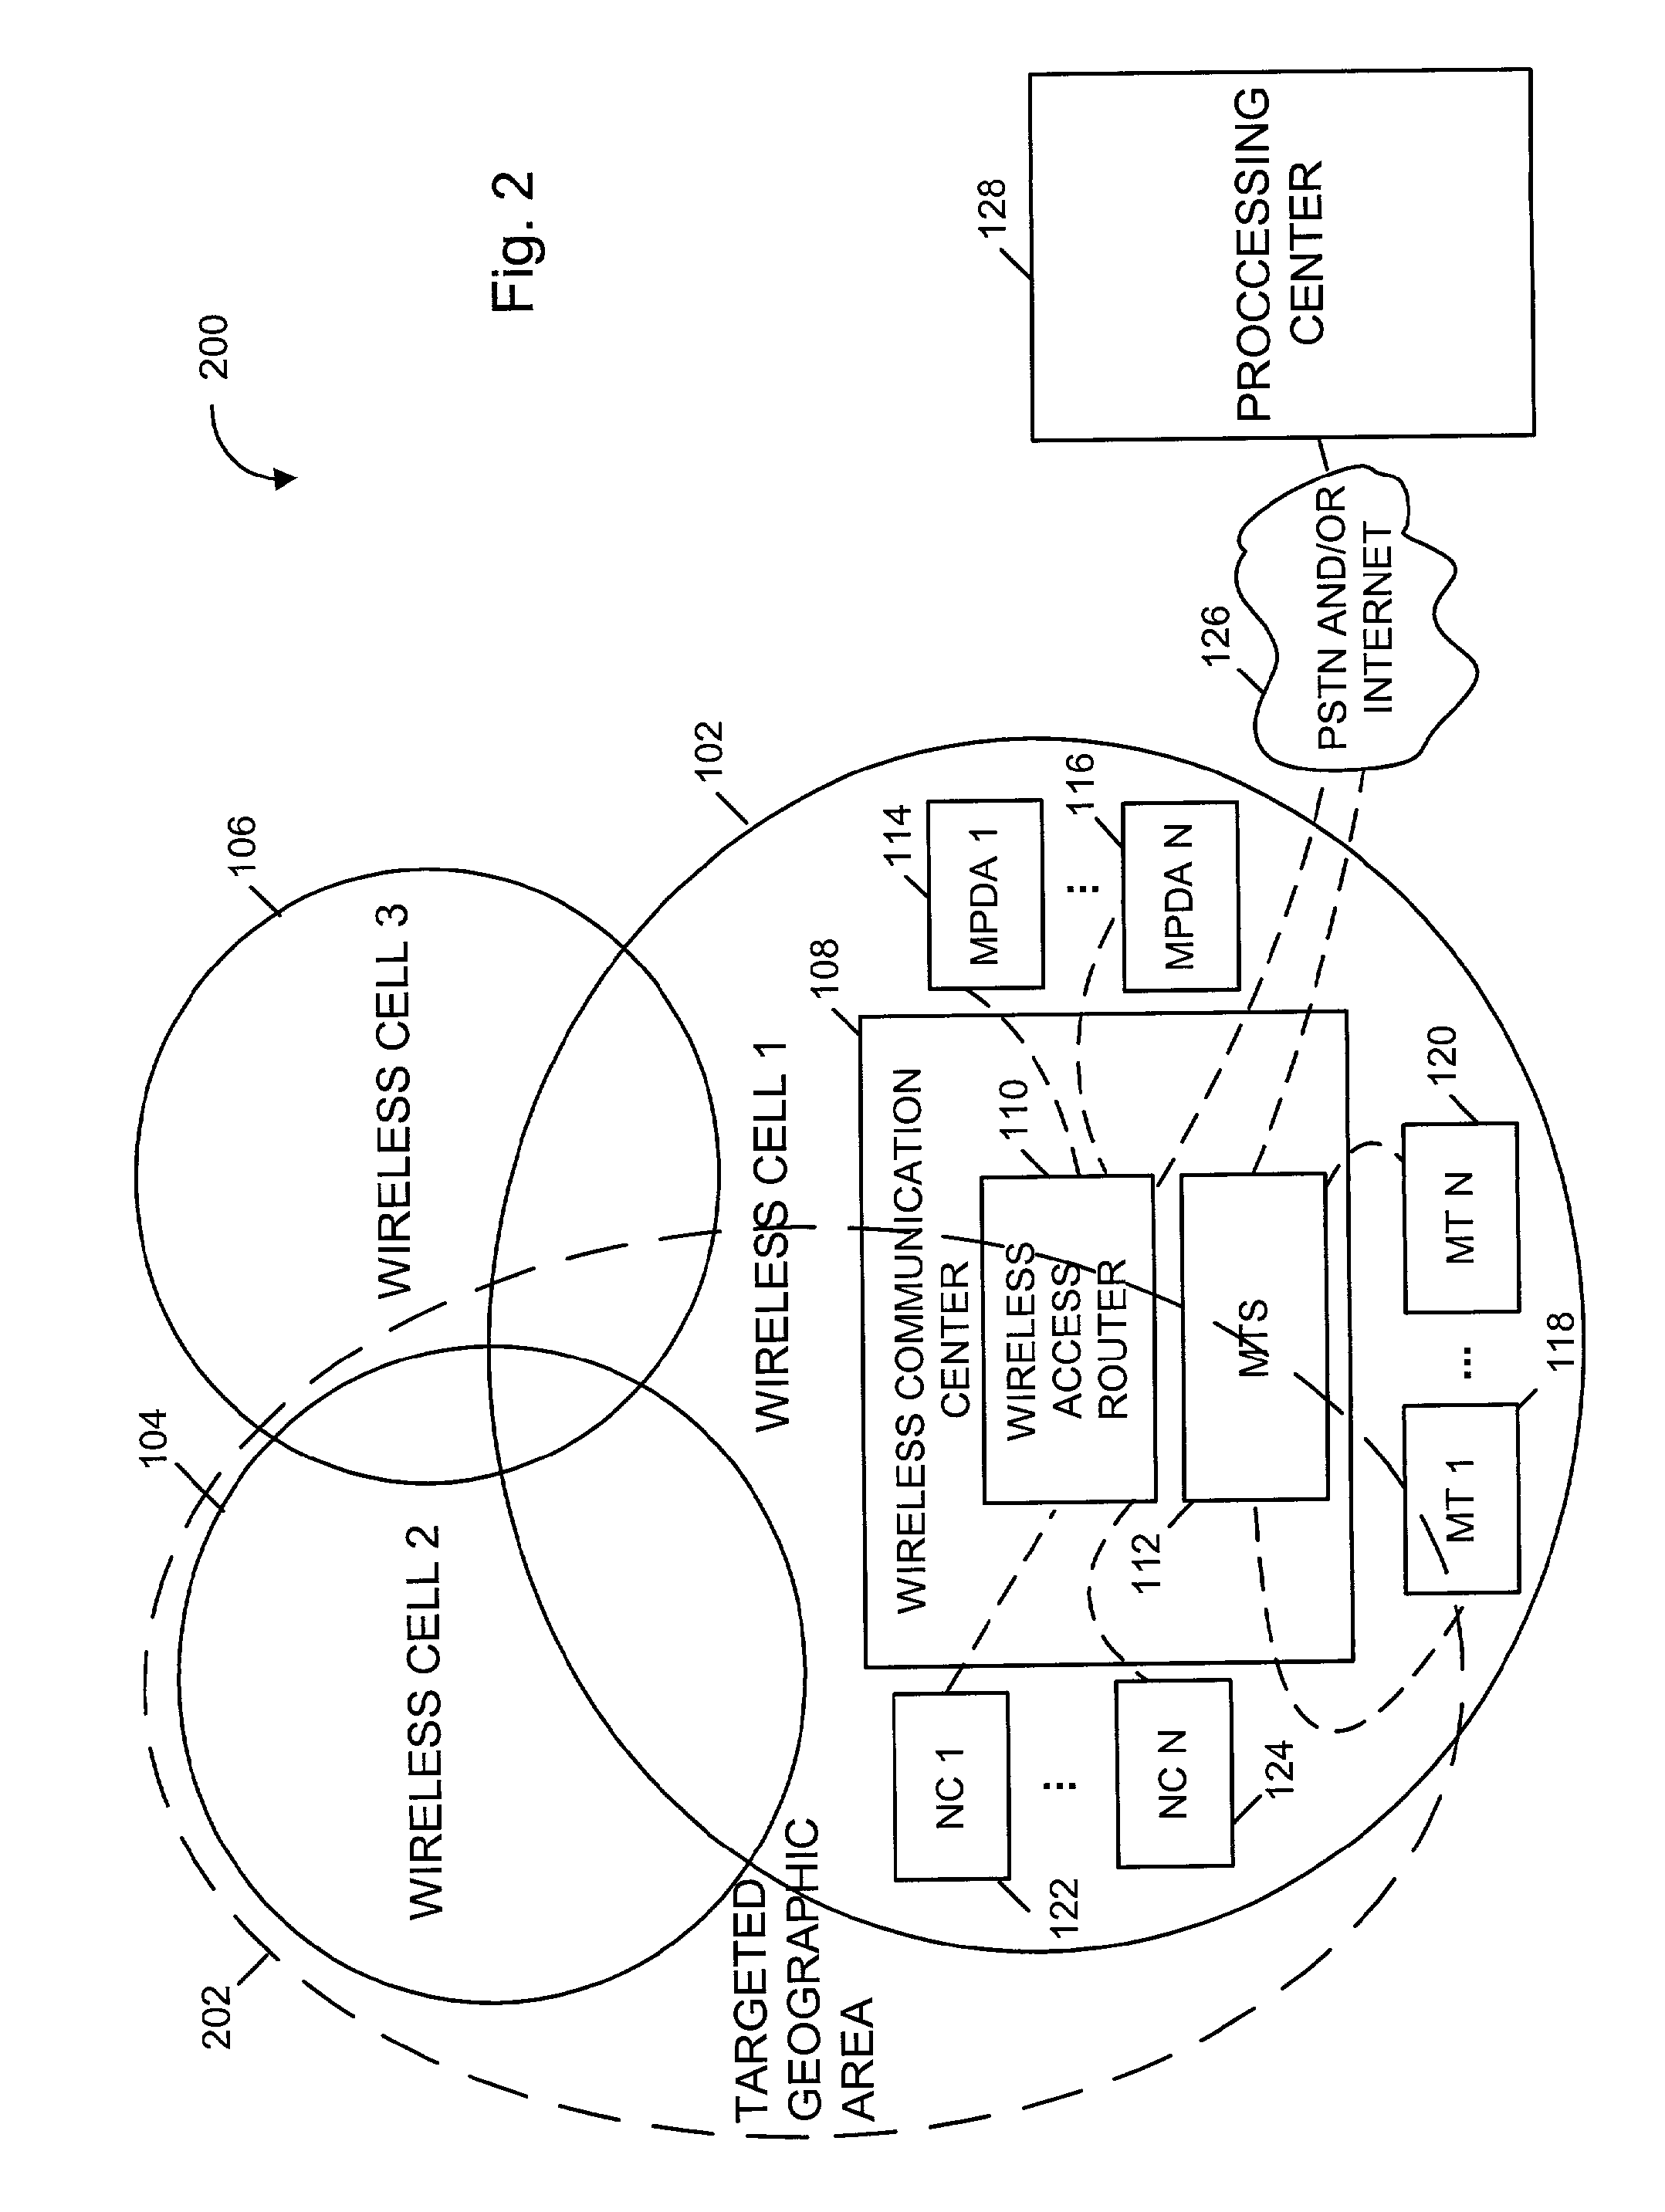 Methods and Apparatus for Extrapolating Person and Device Counts